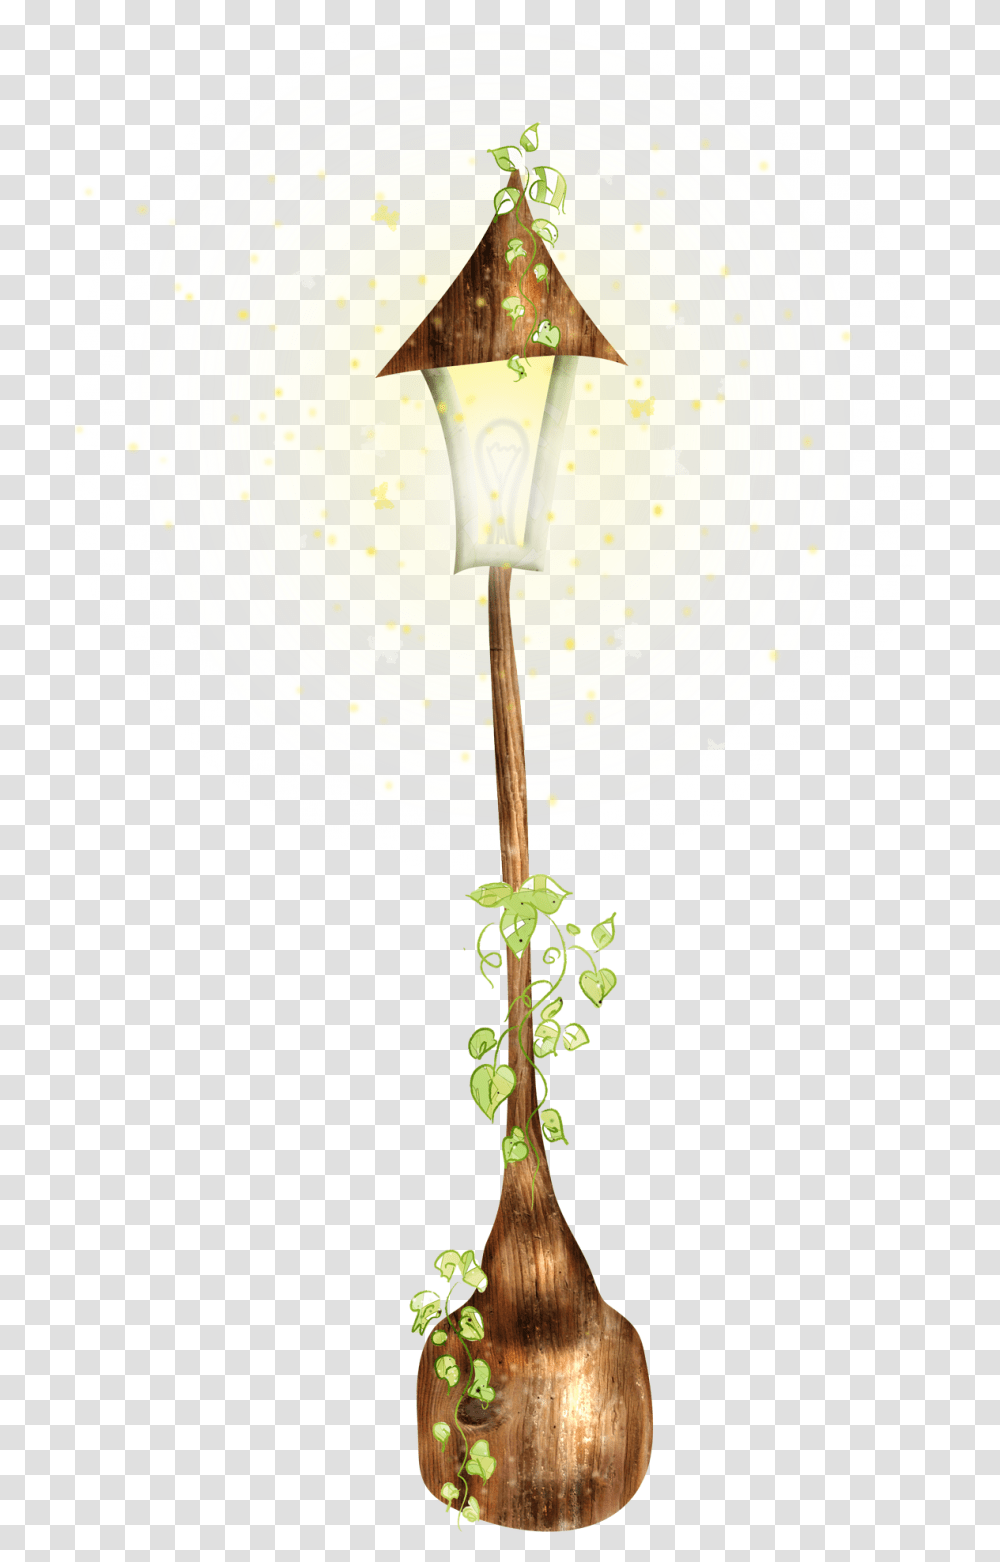 Light Fairy Lights Free Hq Image Clipart Illustration, Lamp, Lampshade, Lantern, Table Lamp Transparent Png